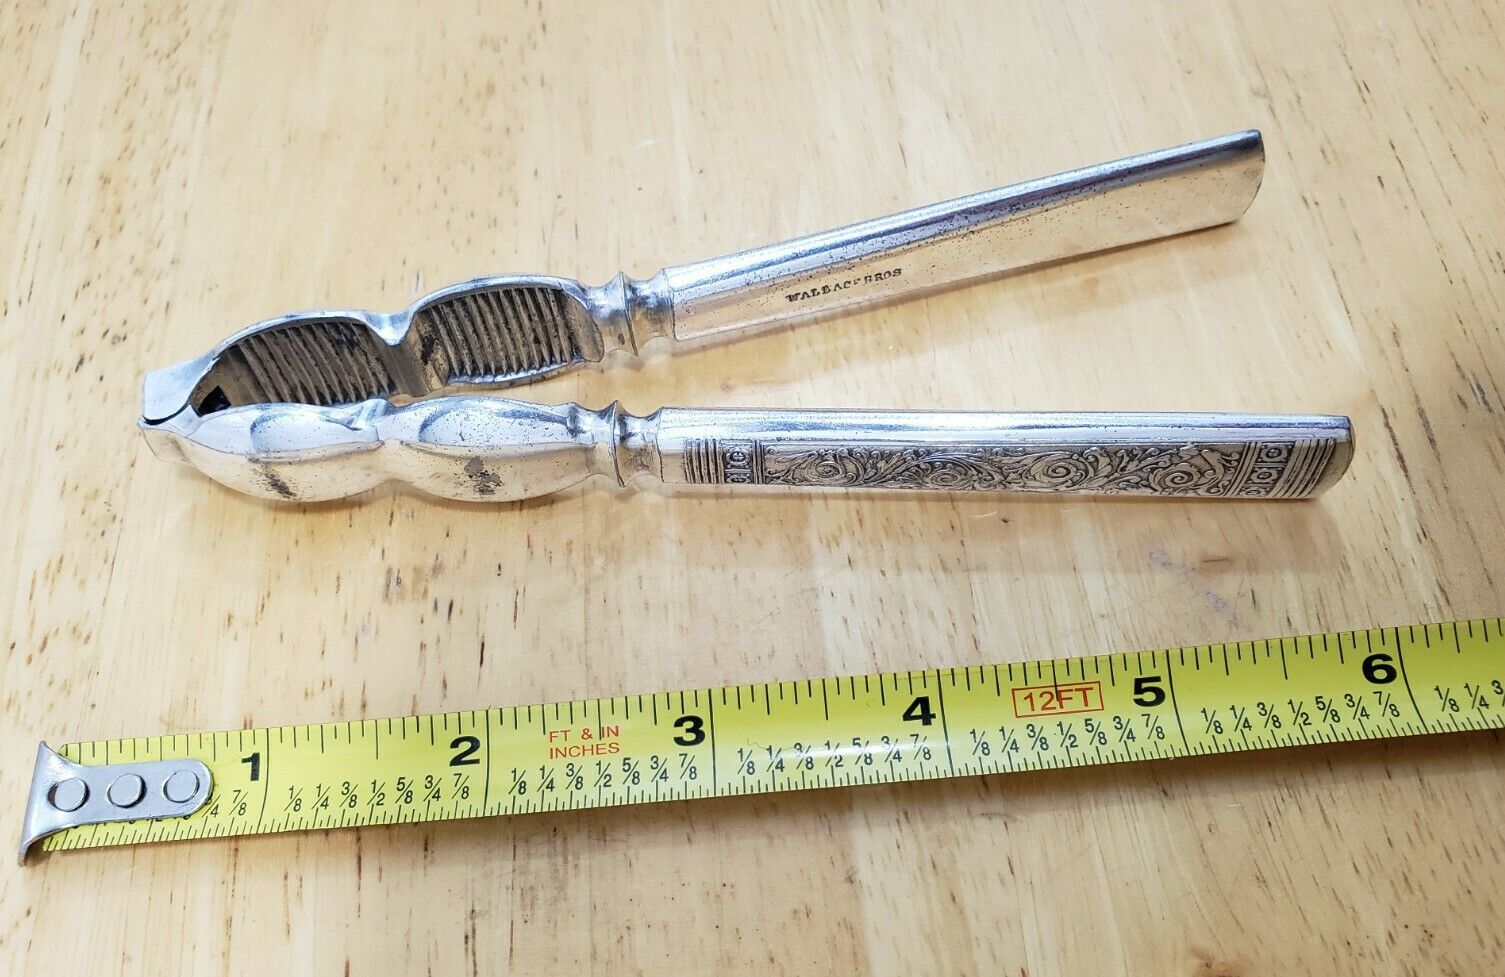 RARE WALLACE BROS ANTIQUE ART NOUVEAU SOLID SILVERPLATED NUT CRACKER 